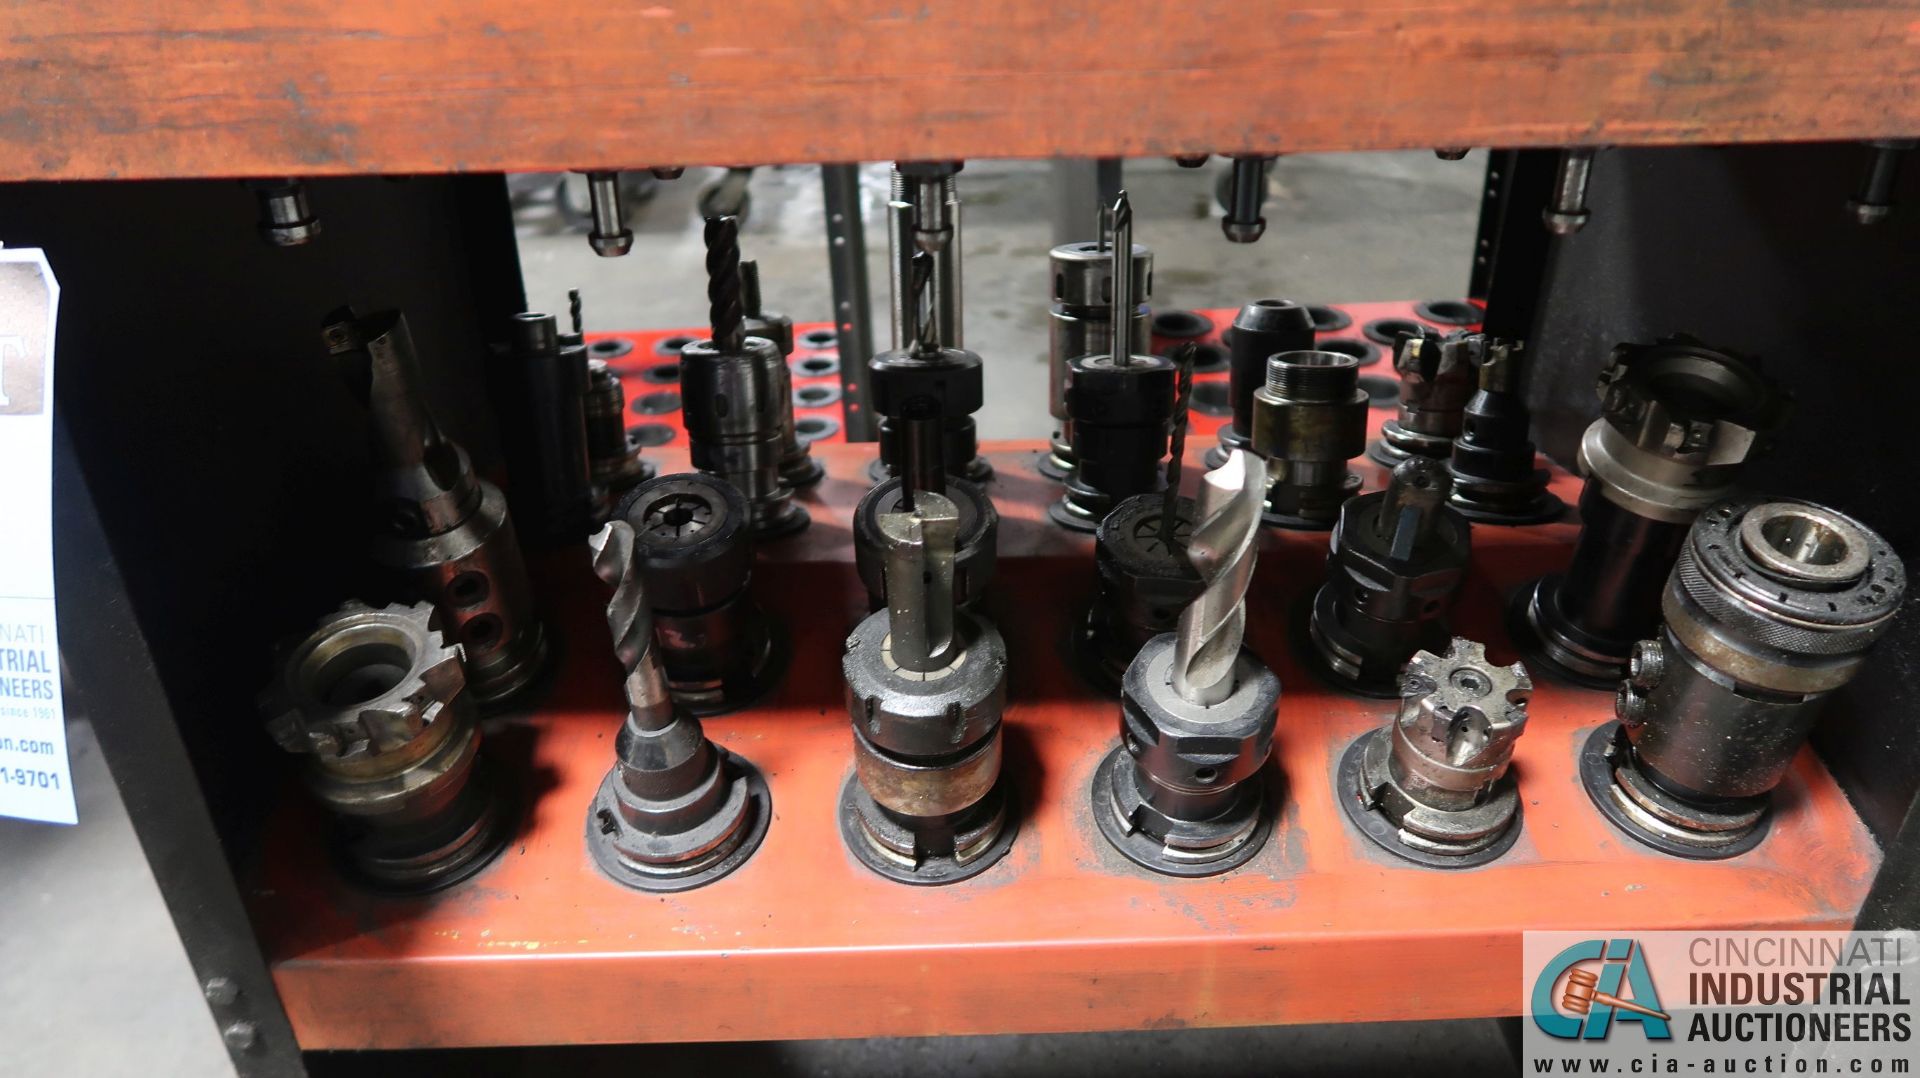 CAT 40 TAPER TOOLHOLDERS WITH HUOT TOOLSCOOT CART - Image 3 of 9